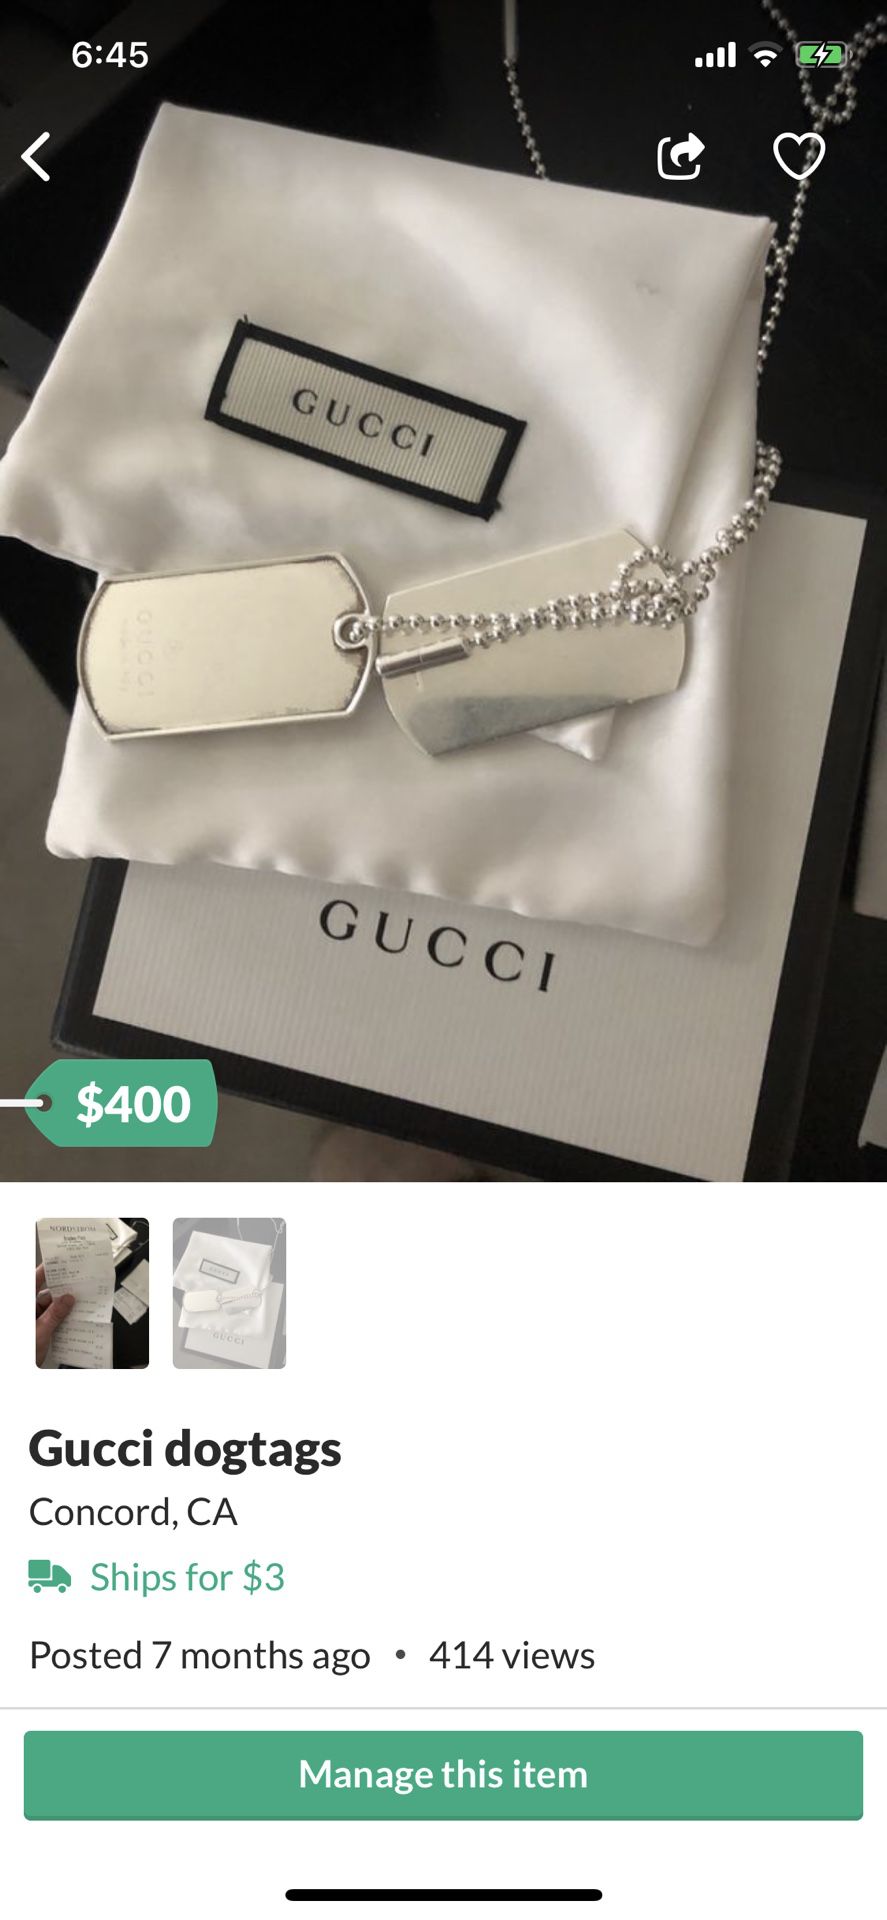 Authentic Gucci dog tags